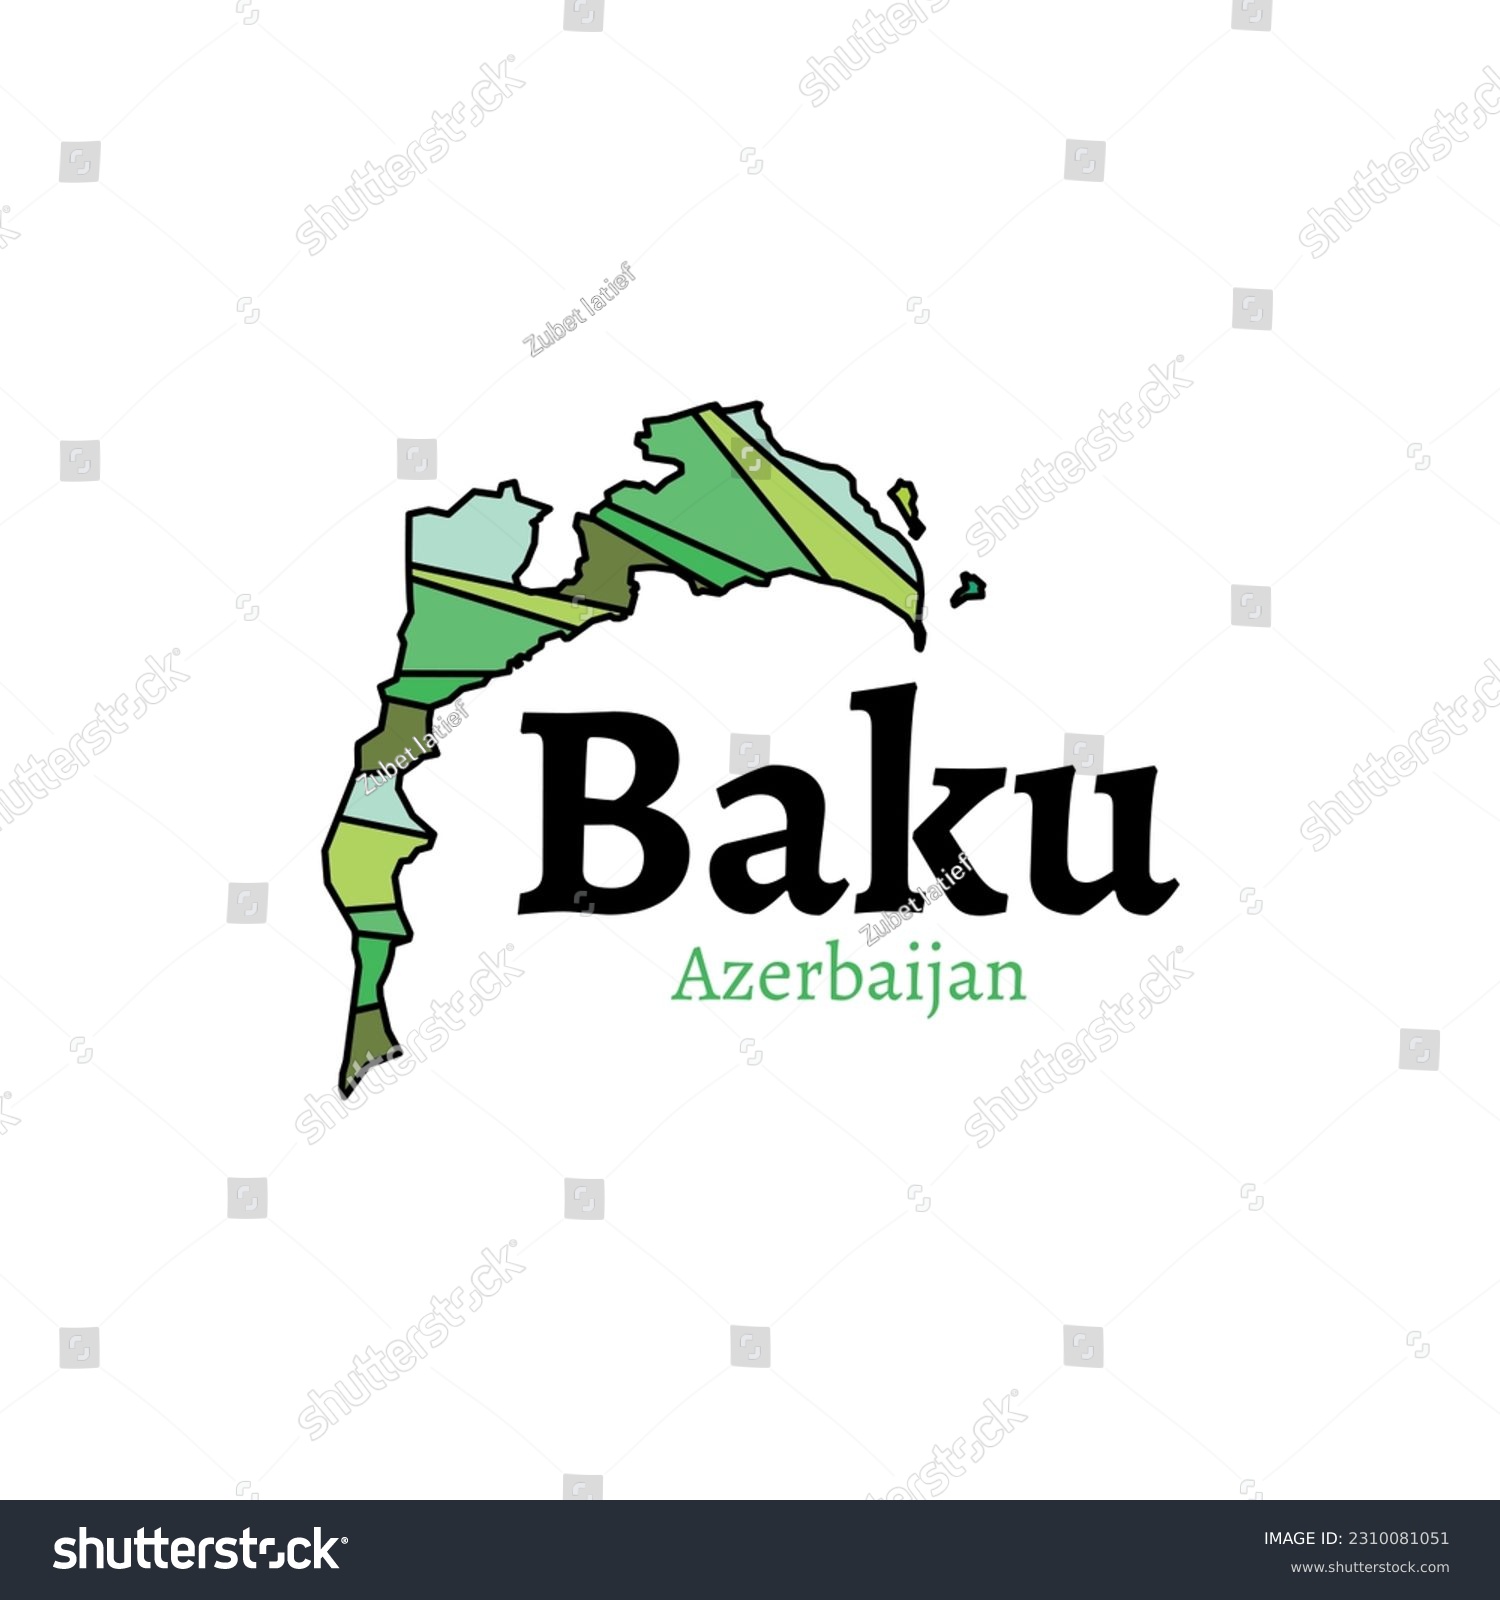 SVG of Azerbaijan Map. State and district map of Azerbaijan. Detailed map of Baku city administrative area. Royalty free vector illustration. Cityscape svg